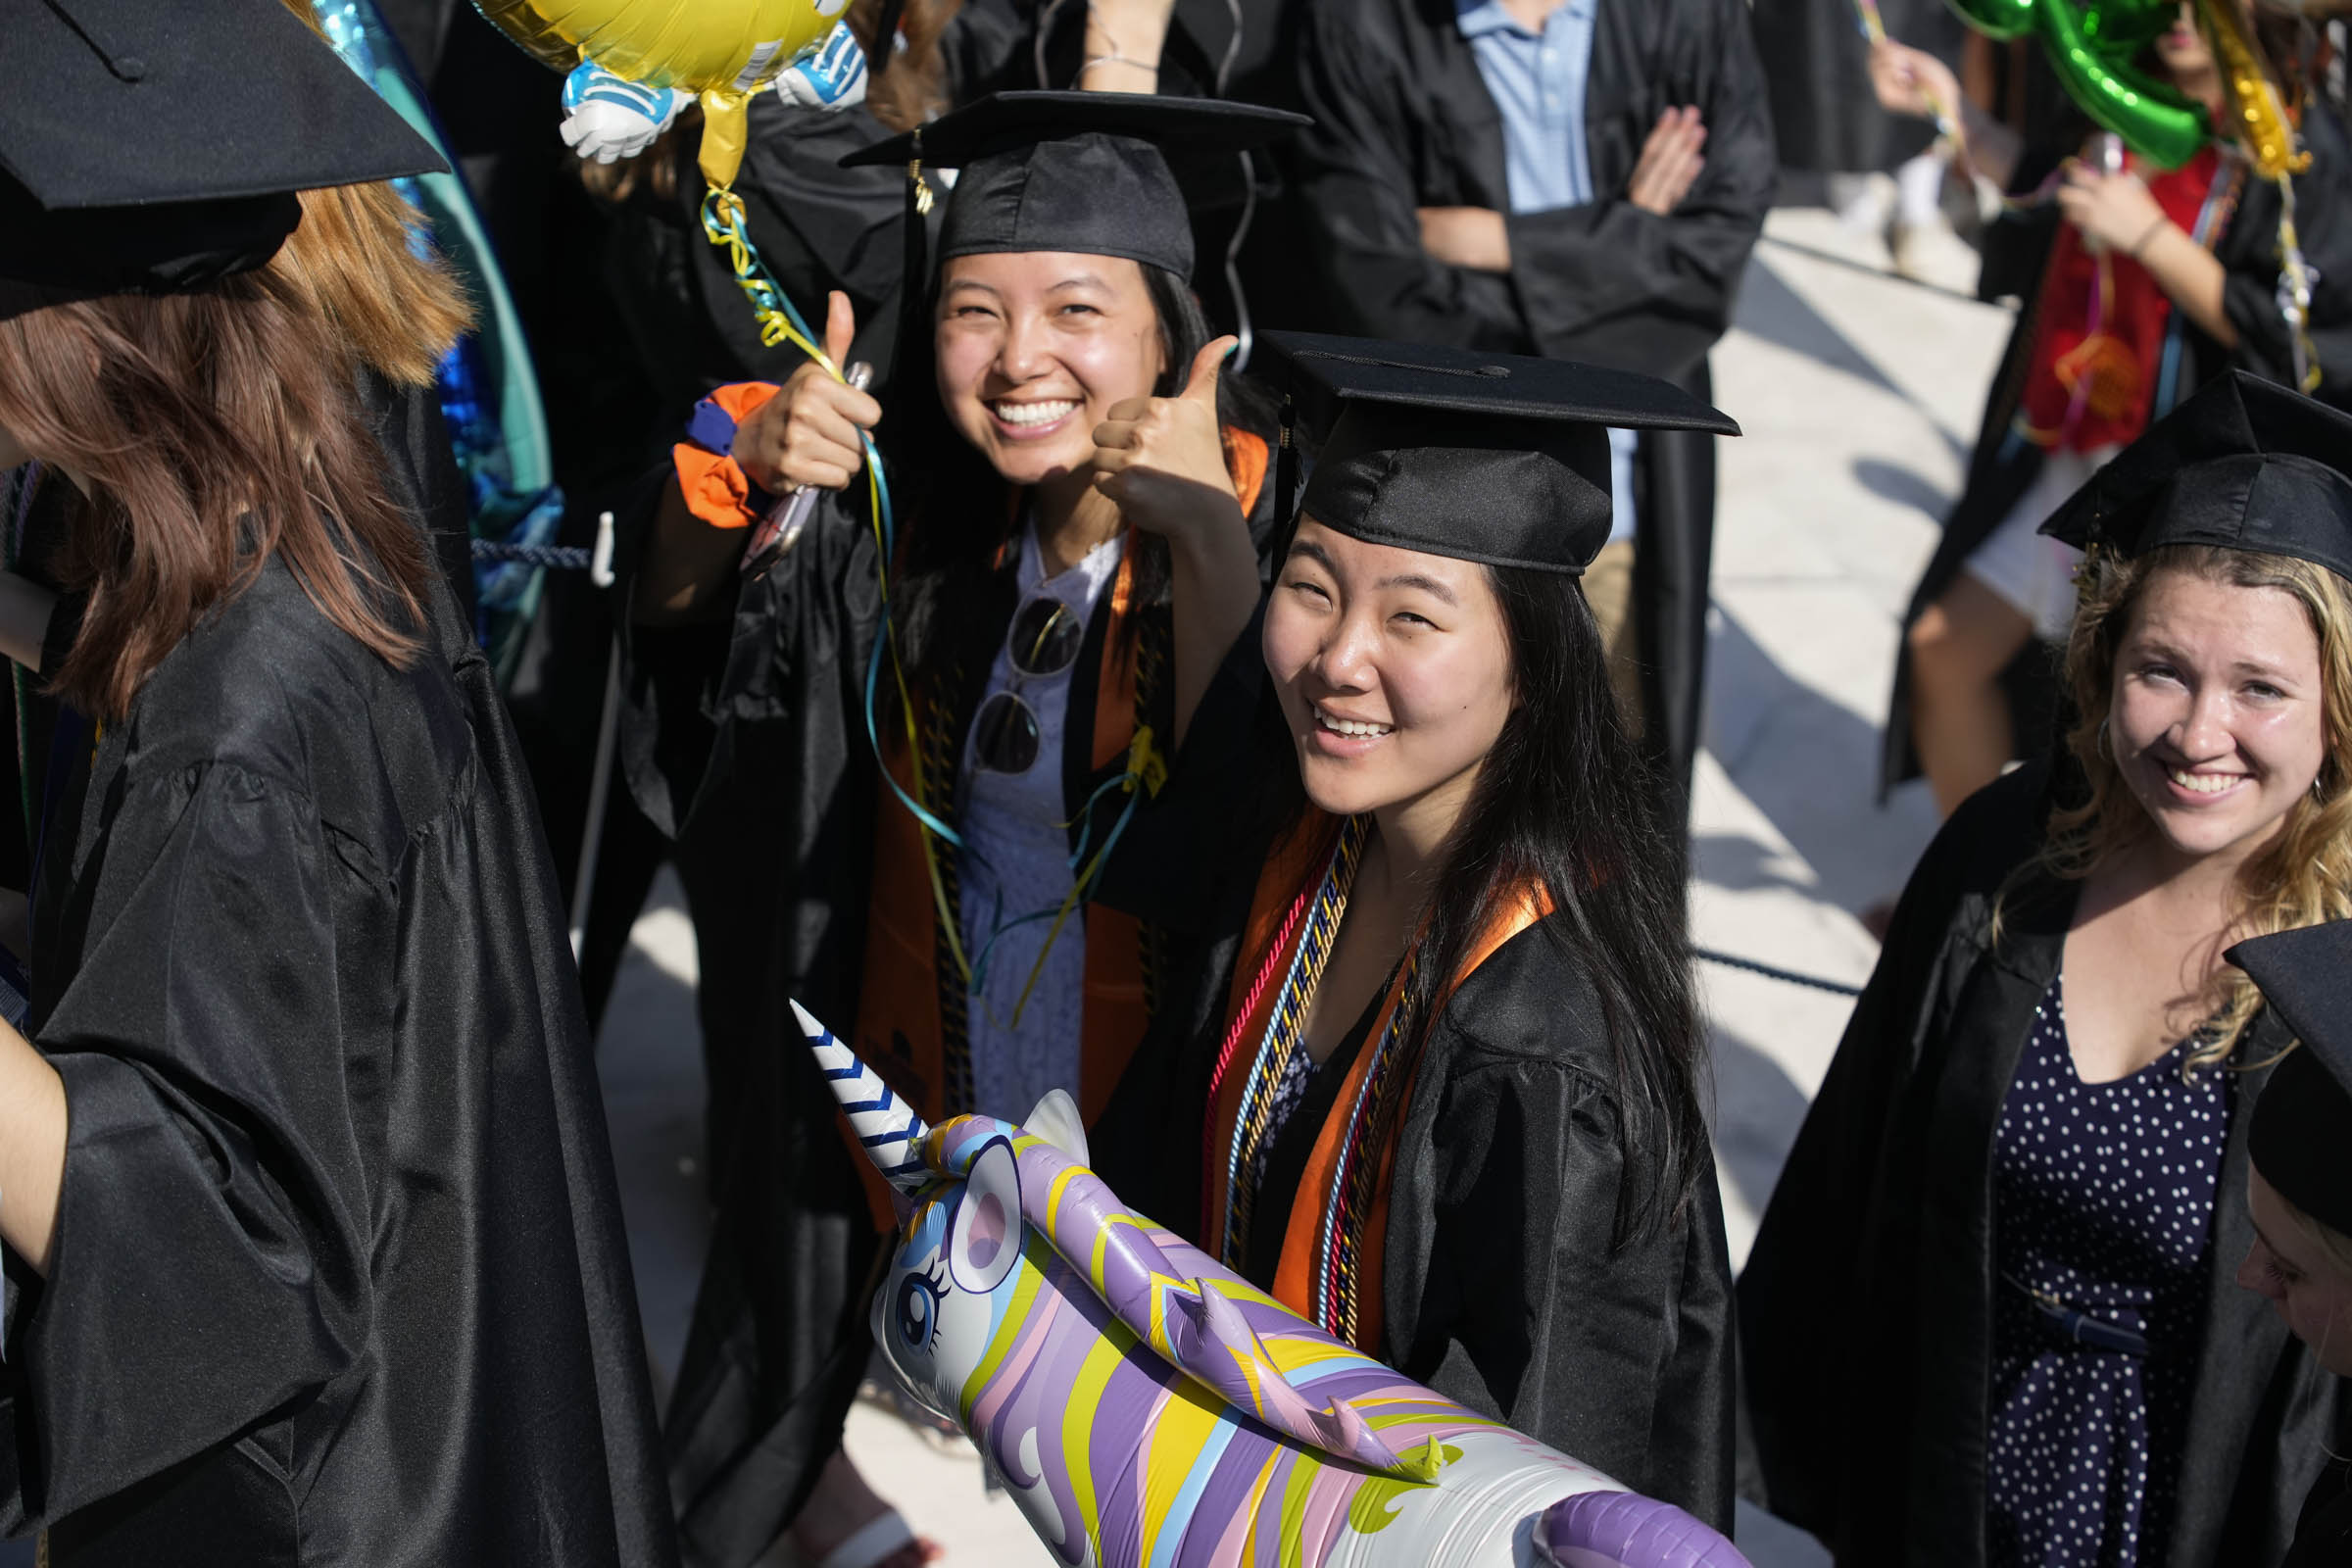 A graduating student gives two thumbs up, with two other students looking on.